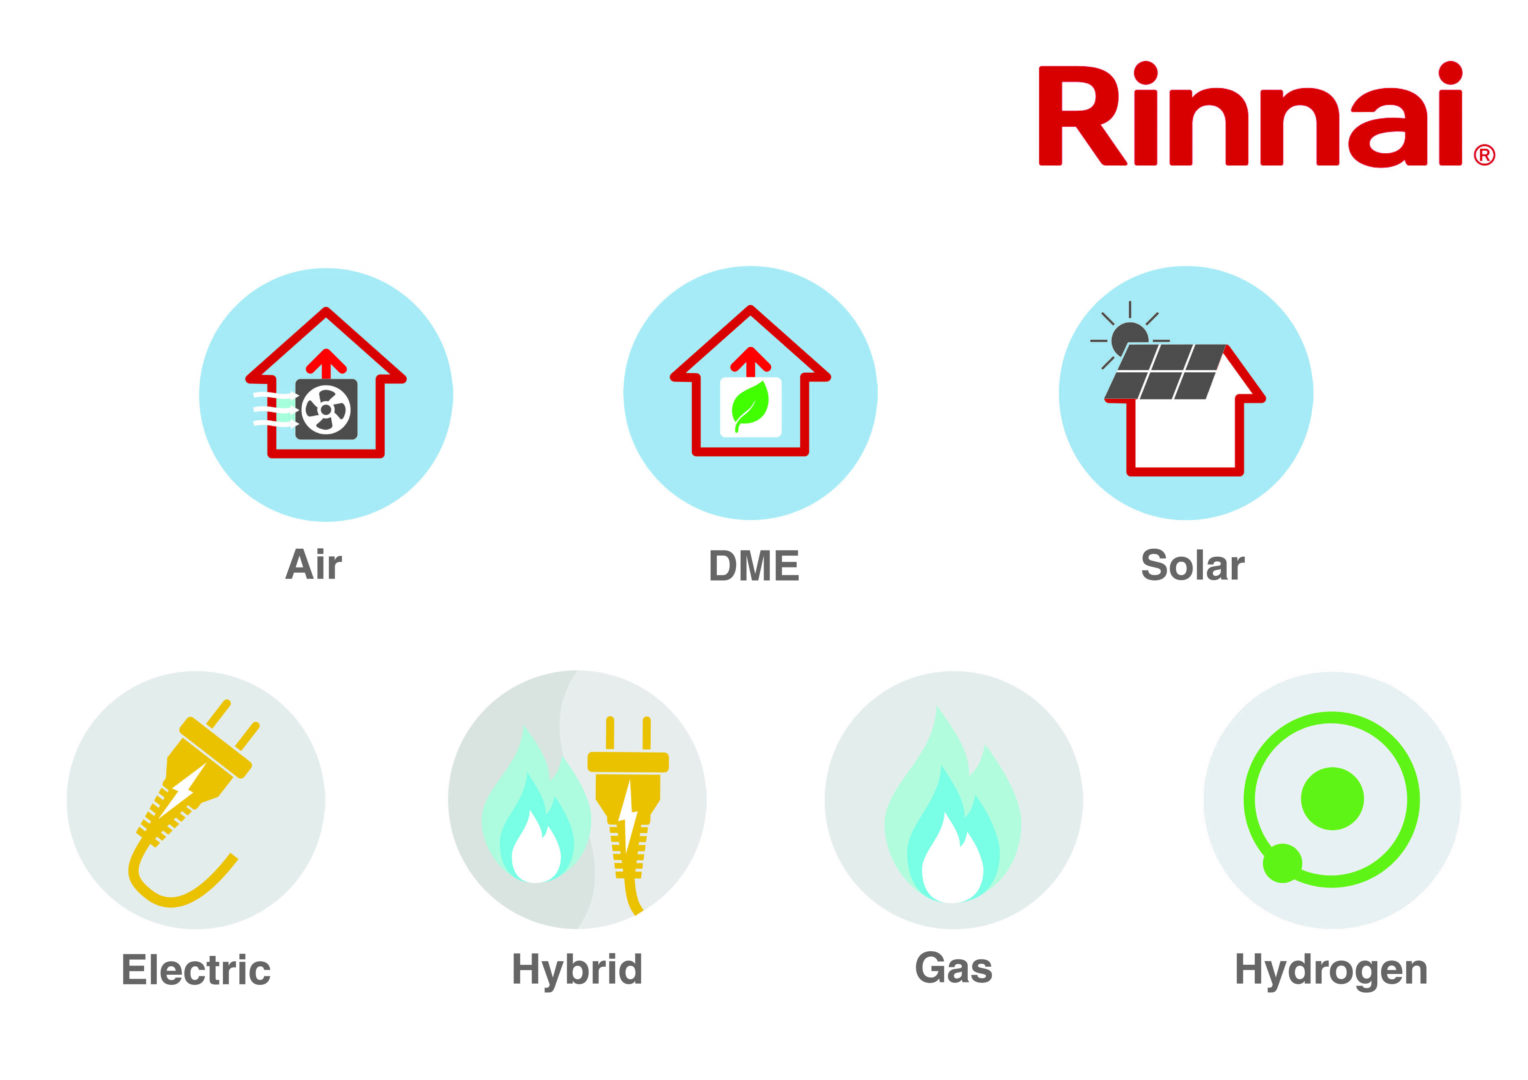 RINNAI’S INSTALLER SHOW TO FEATURE NAKED ENERGY’S SOLAR PRODUCTS @rinnai_uk